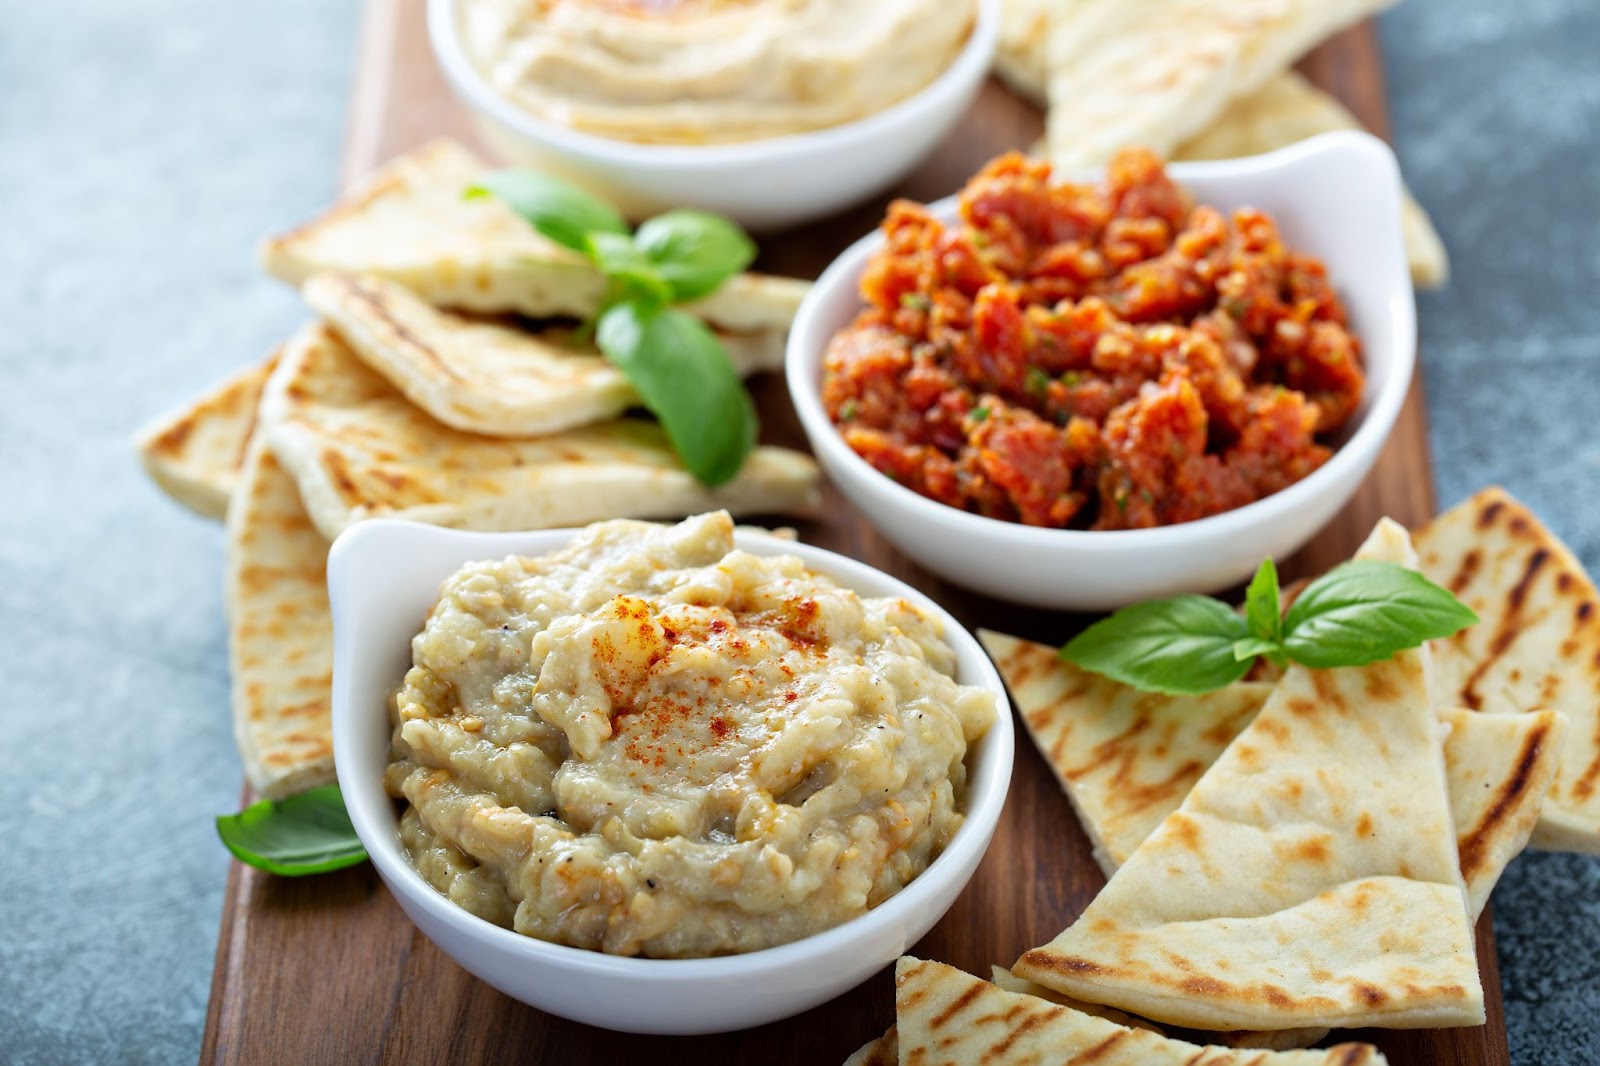 Close up of a Mediterranean Mezze Board featuring a wooden cutting board topped with a variety of dips and pita bread. This is one of many great appetizer themed board presentation ideas.